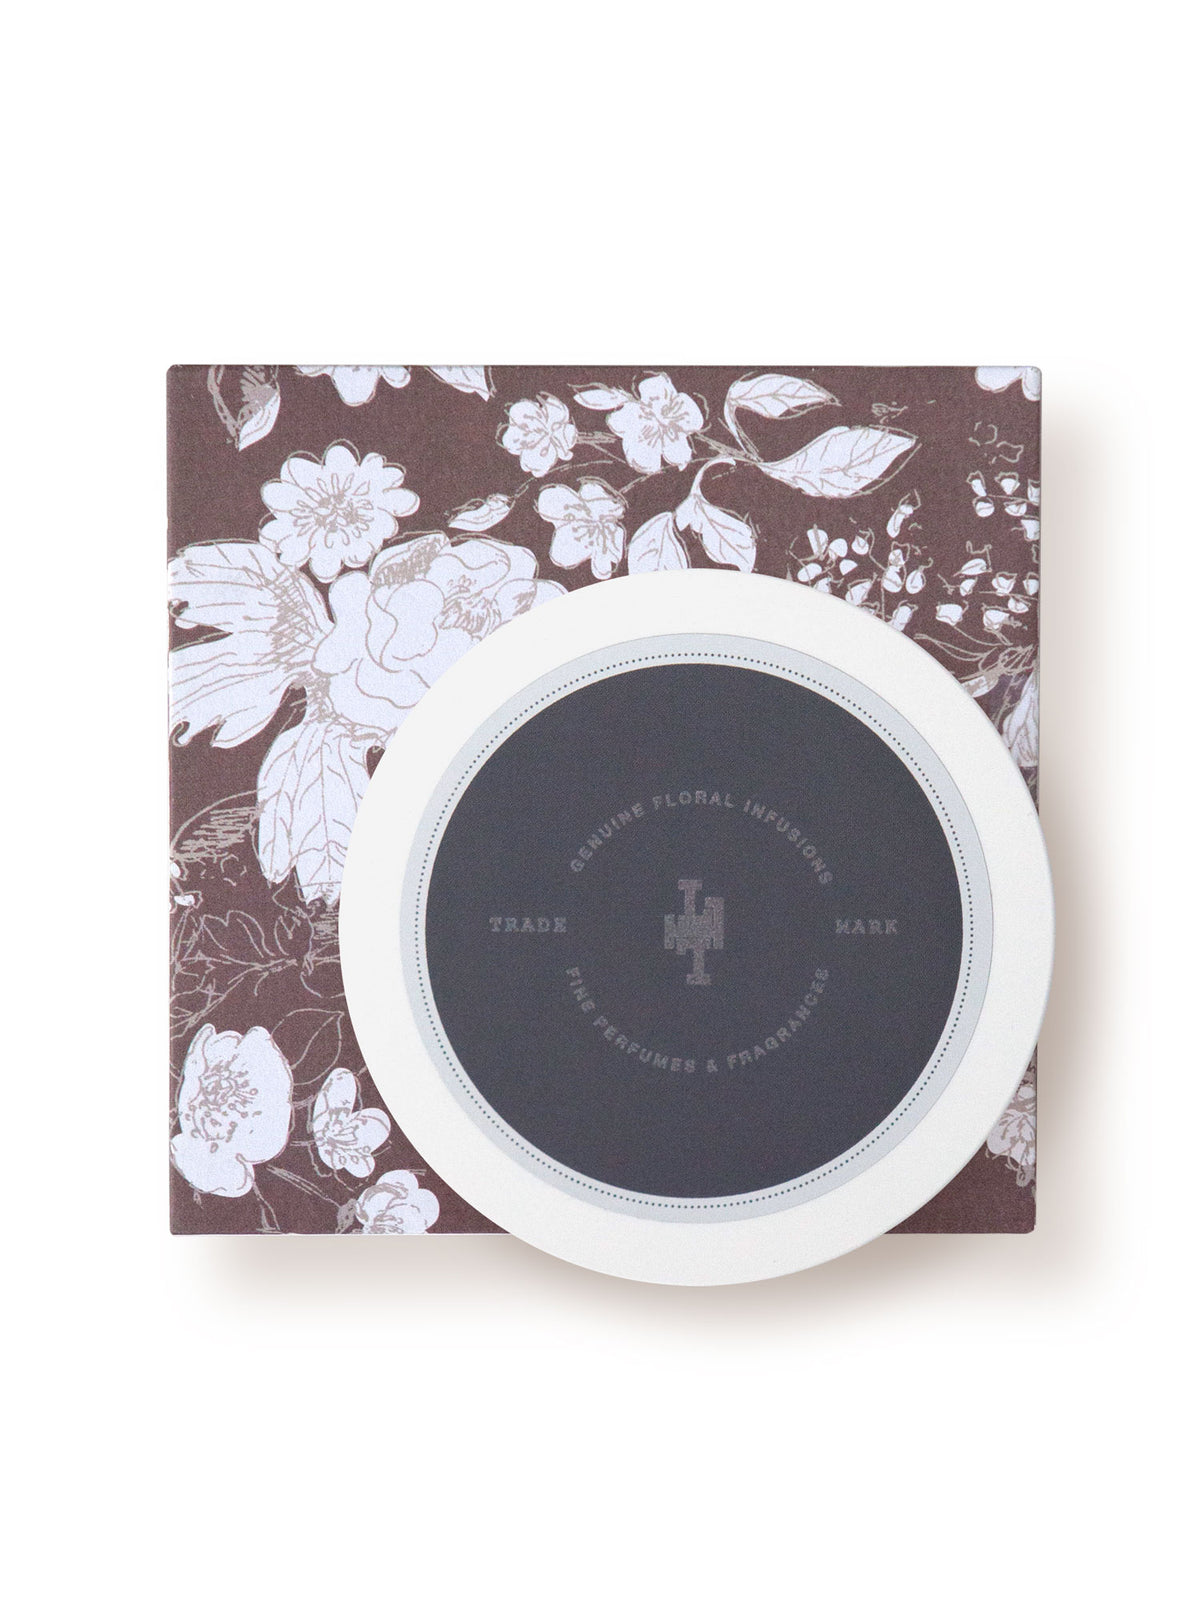 A round, white Margot Elena compact with a cocoa butter scent and a floral design on the case, placed on a matching floral box against a plain background. The compact features a logo in the center.